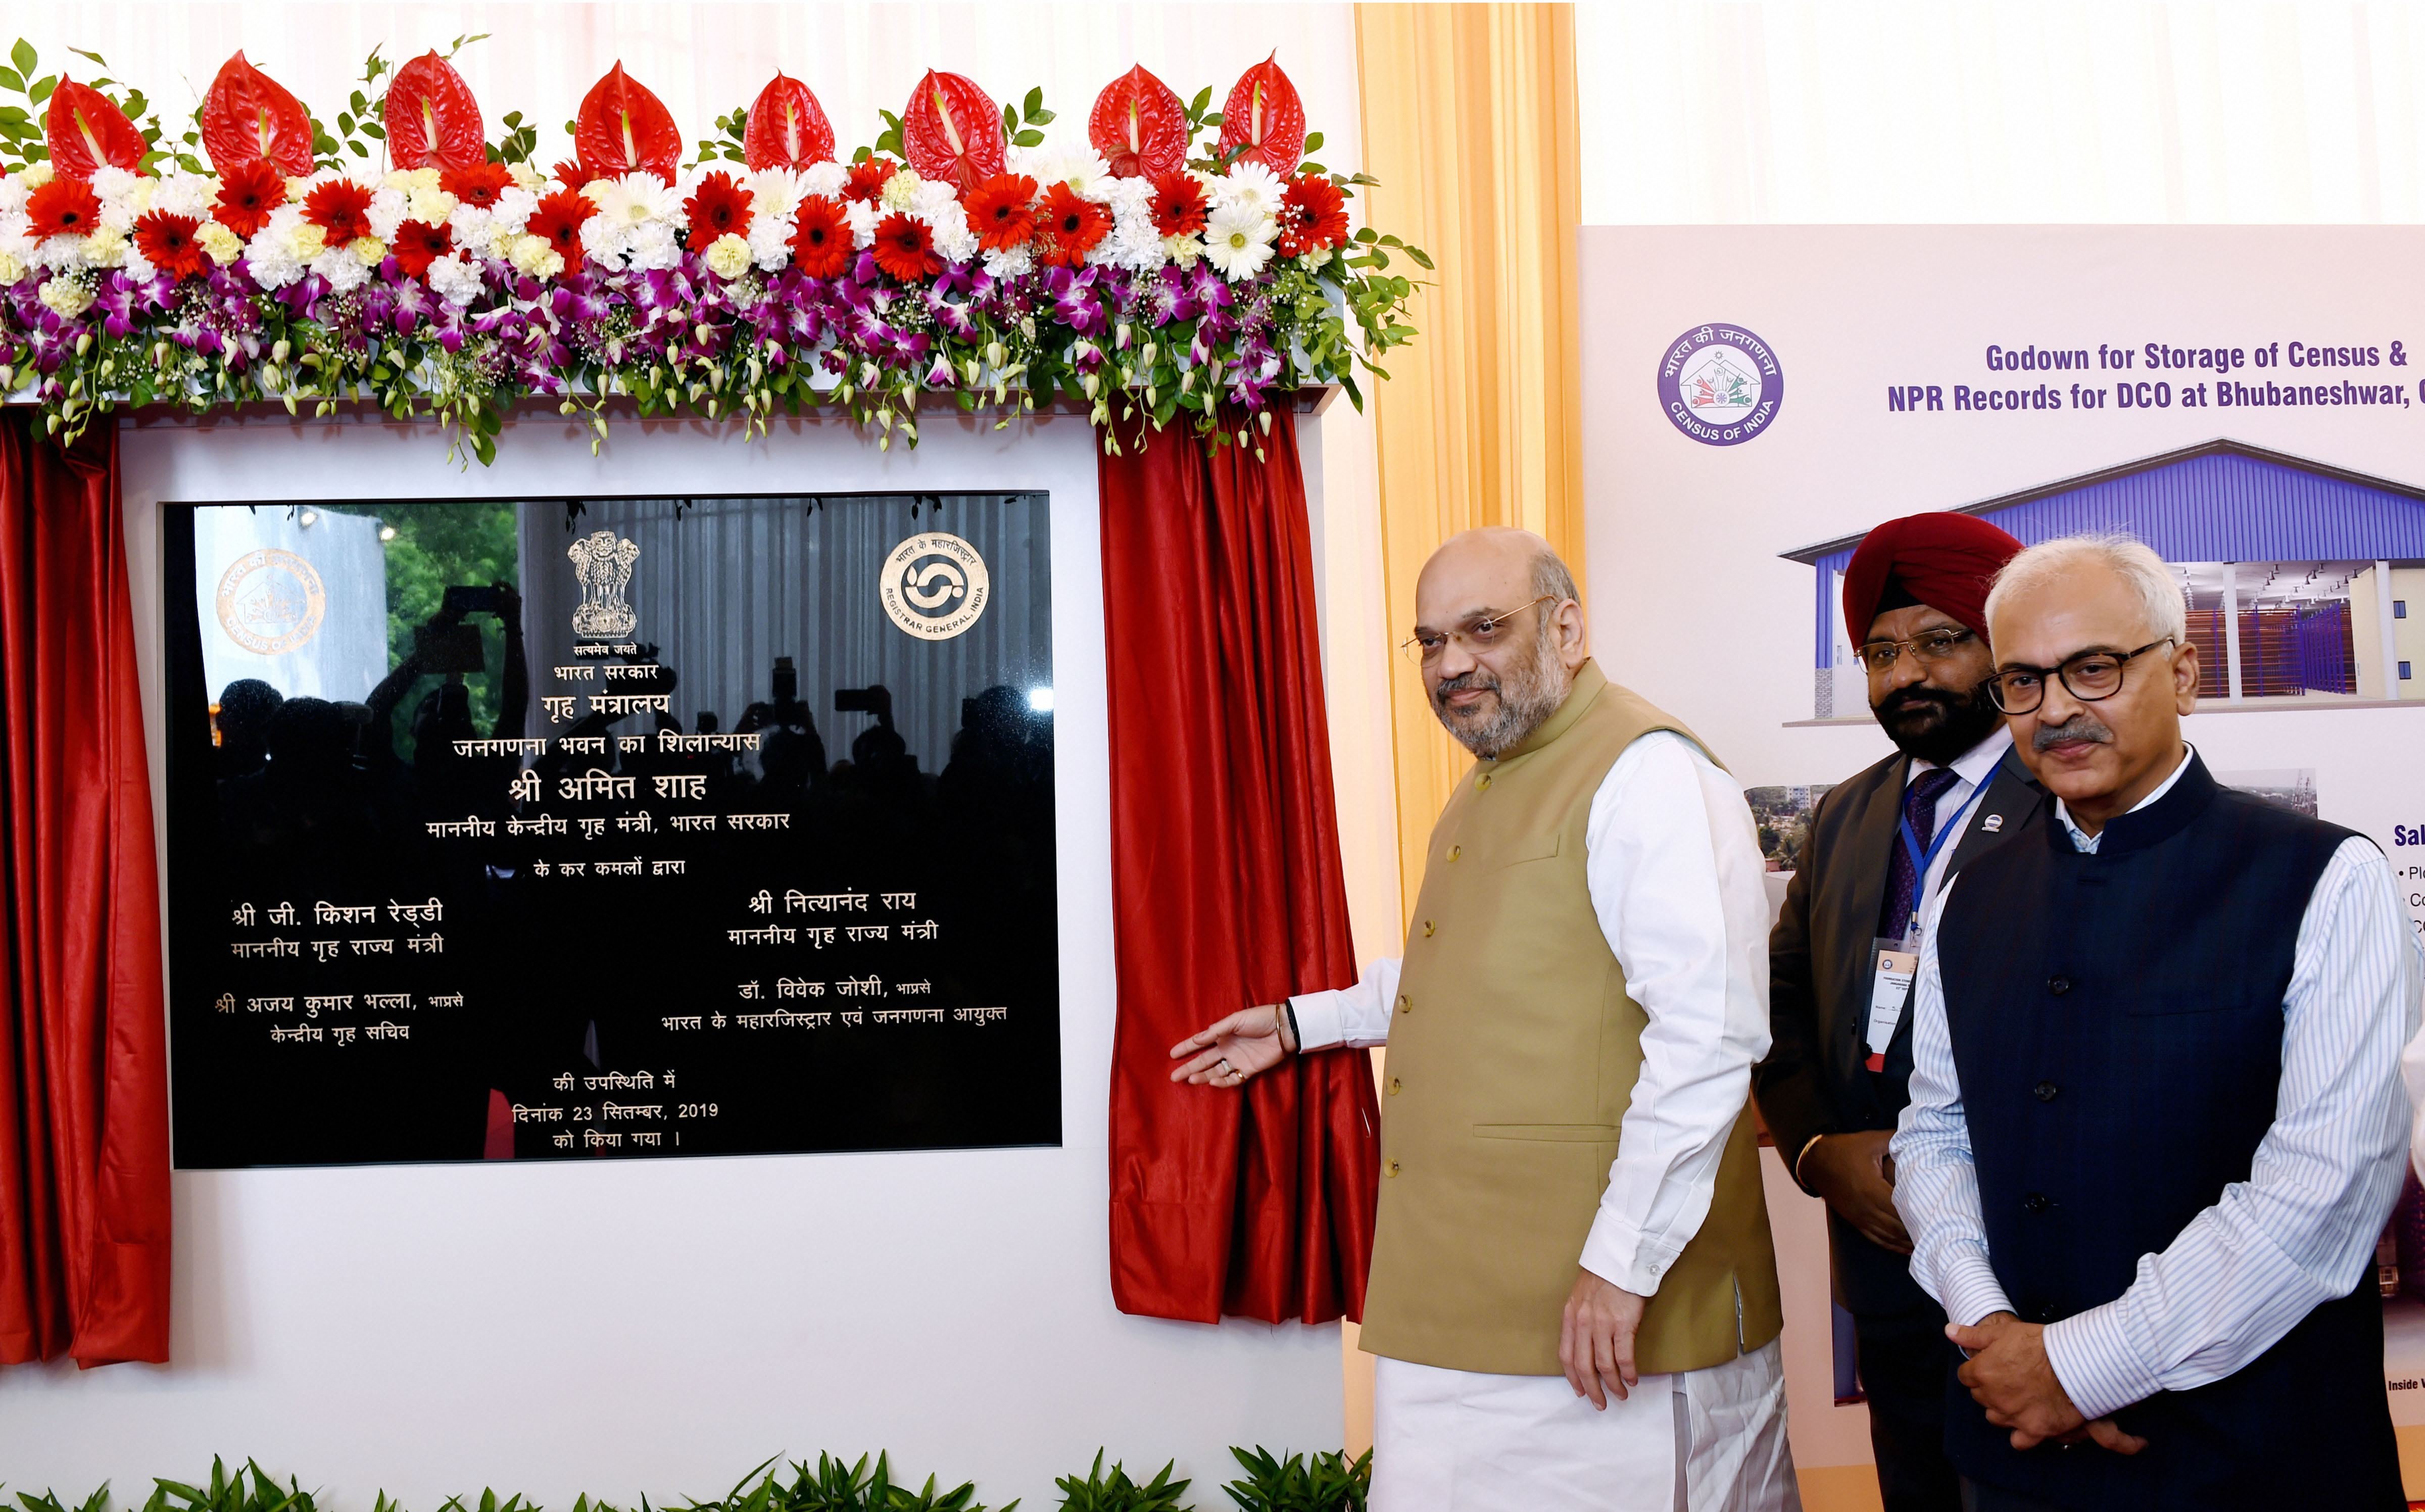 Union home minister Amit Shah lays the foundation stone of Janganana Bhawan, a new building of the Registrar General of India and Census Commissioner, in New Delhi, Monday, September 23, 2019.